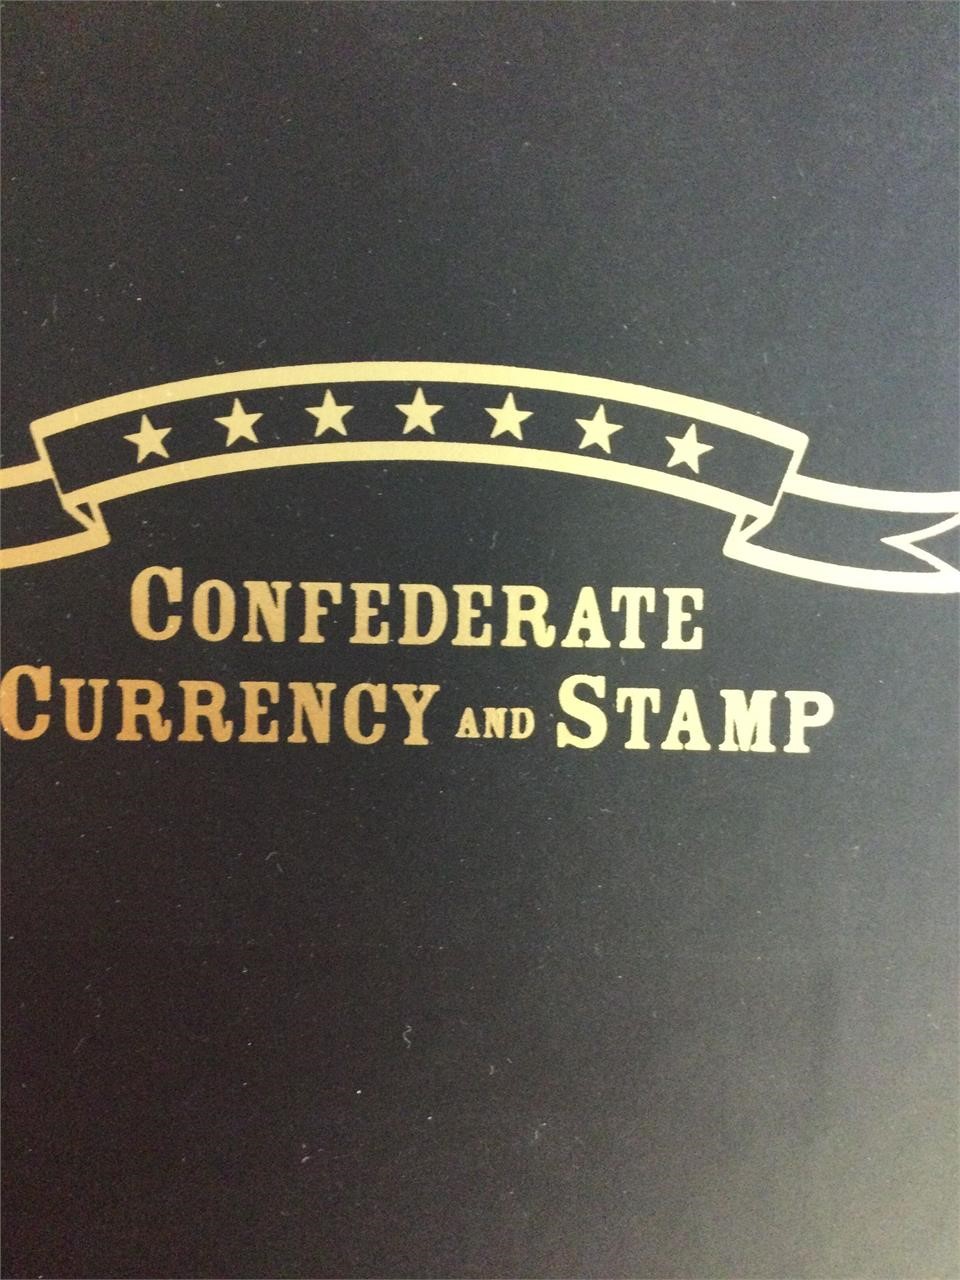 Rare Genuine C.S. Stamp and Currency Collection